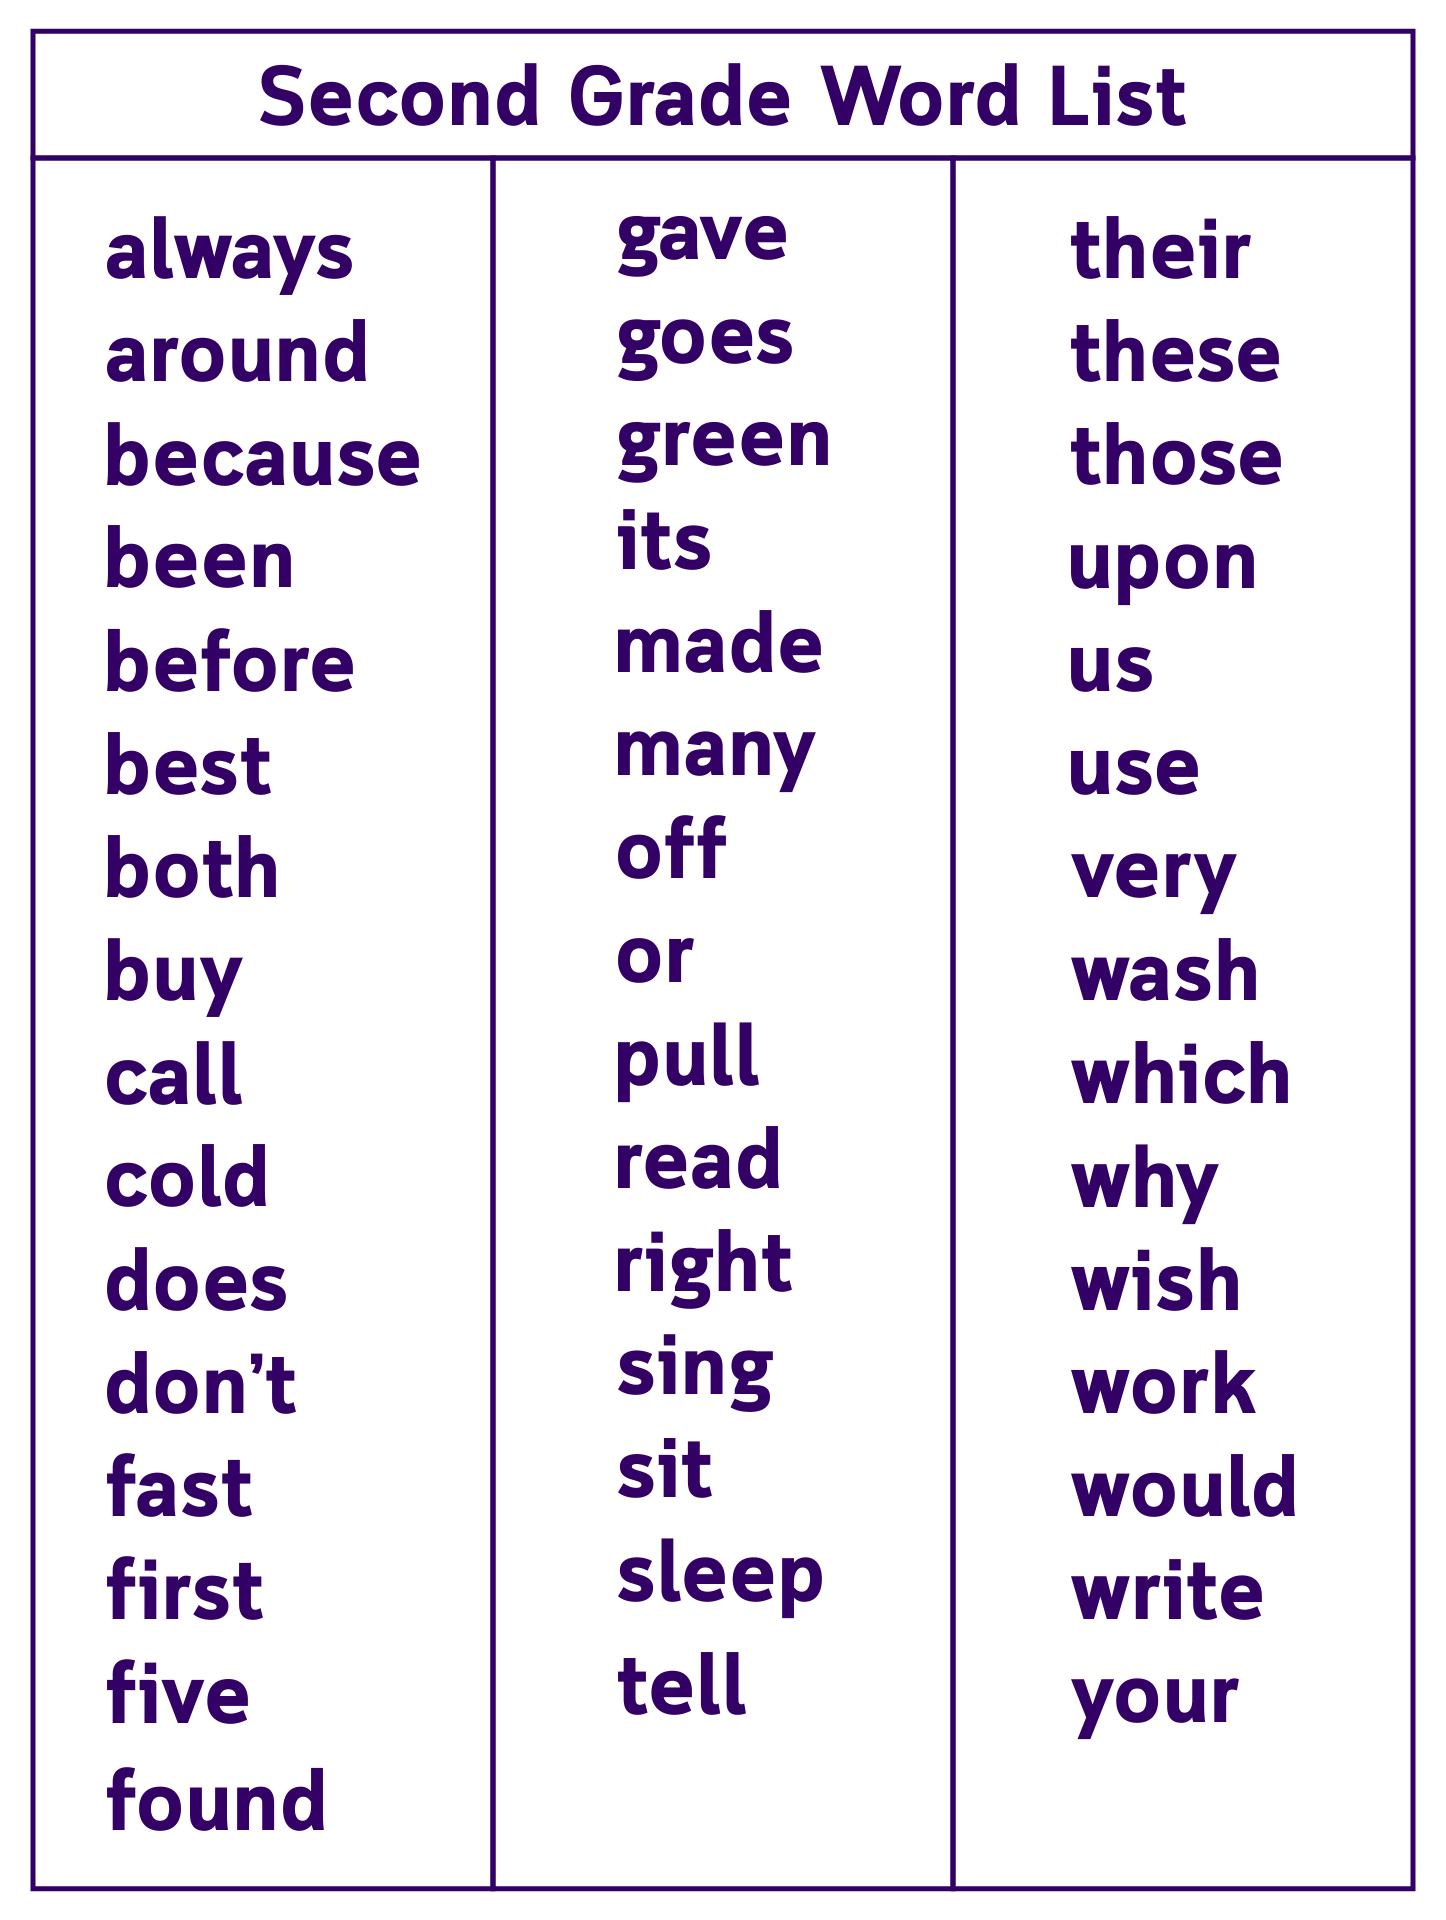 22 Best Second Grade Sight Words Printable - printablee.com Within 2nd Grade Sight Words Worksheet